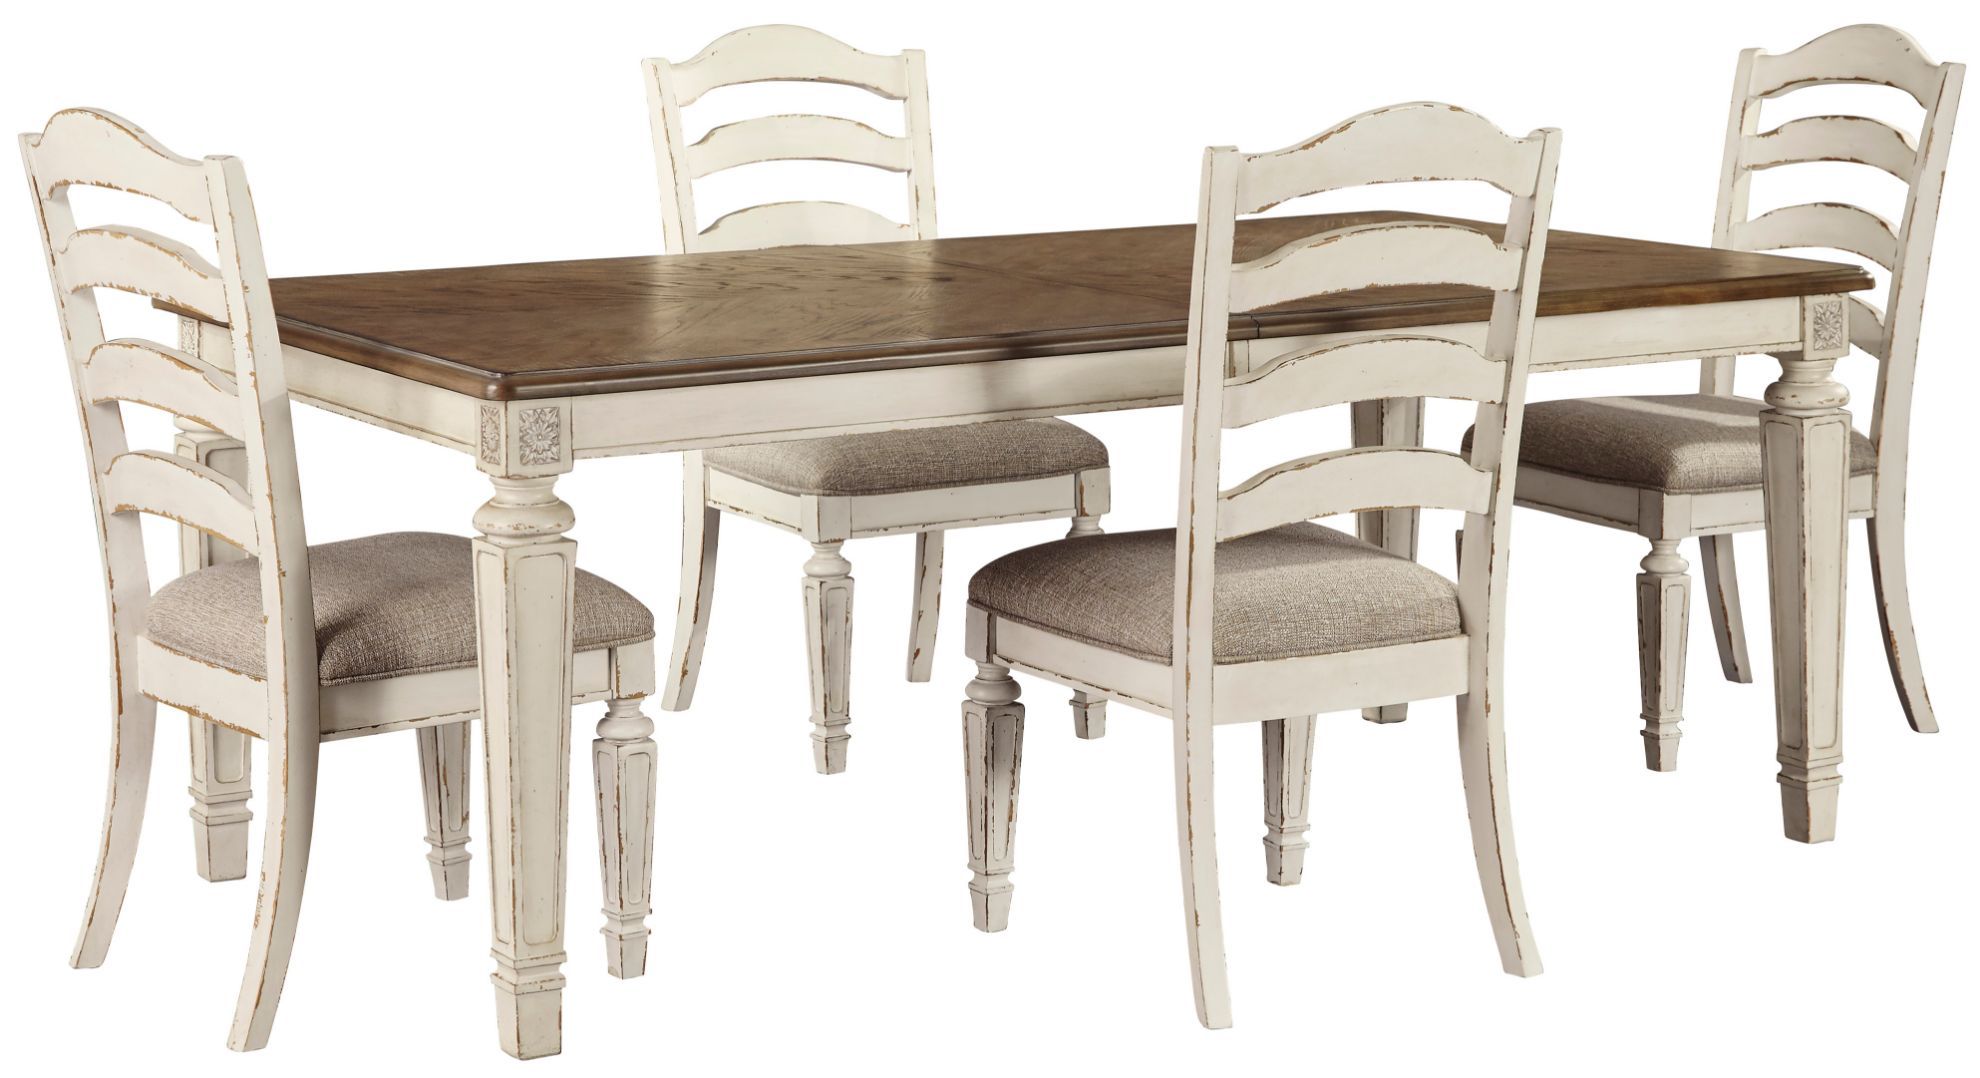 Realyn 5pc Dining Set